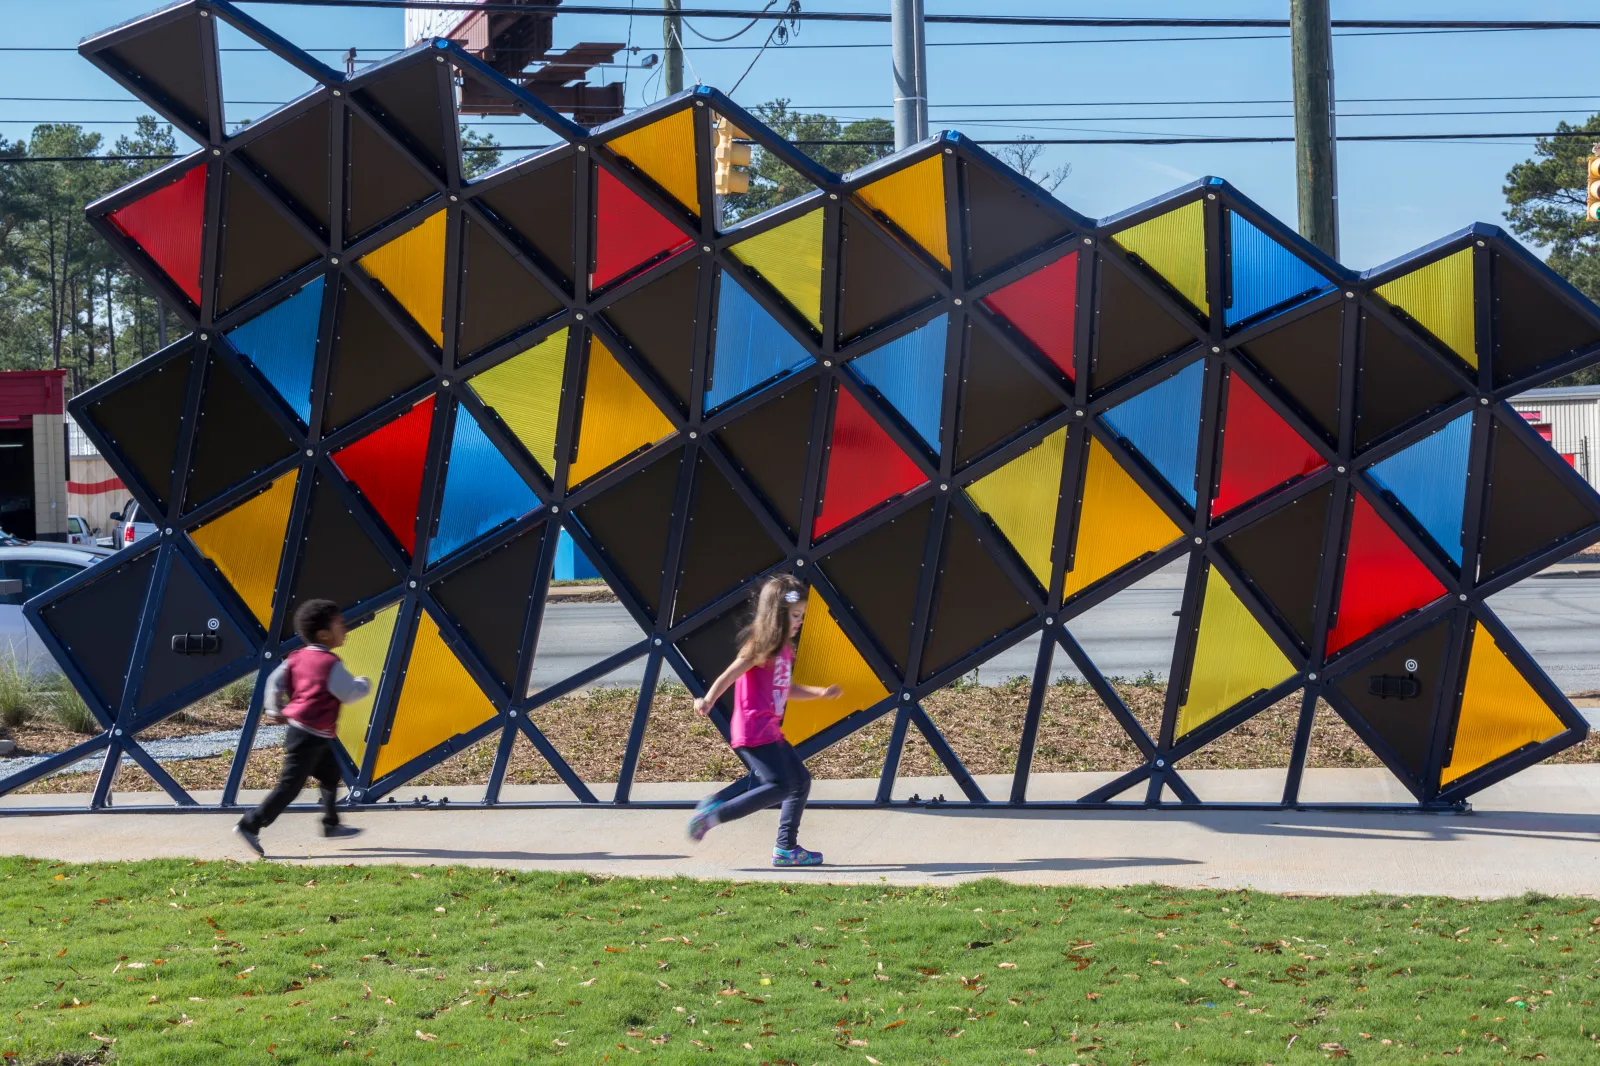 Children play in front of the public art at Richland Library St. Andrews